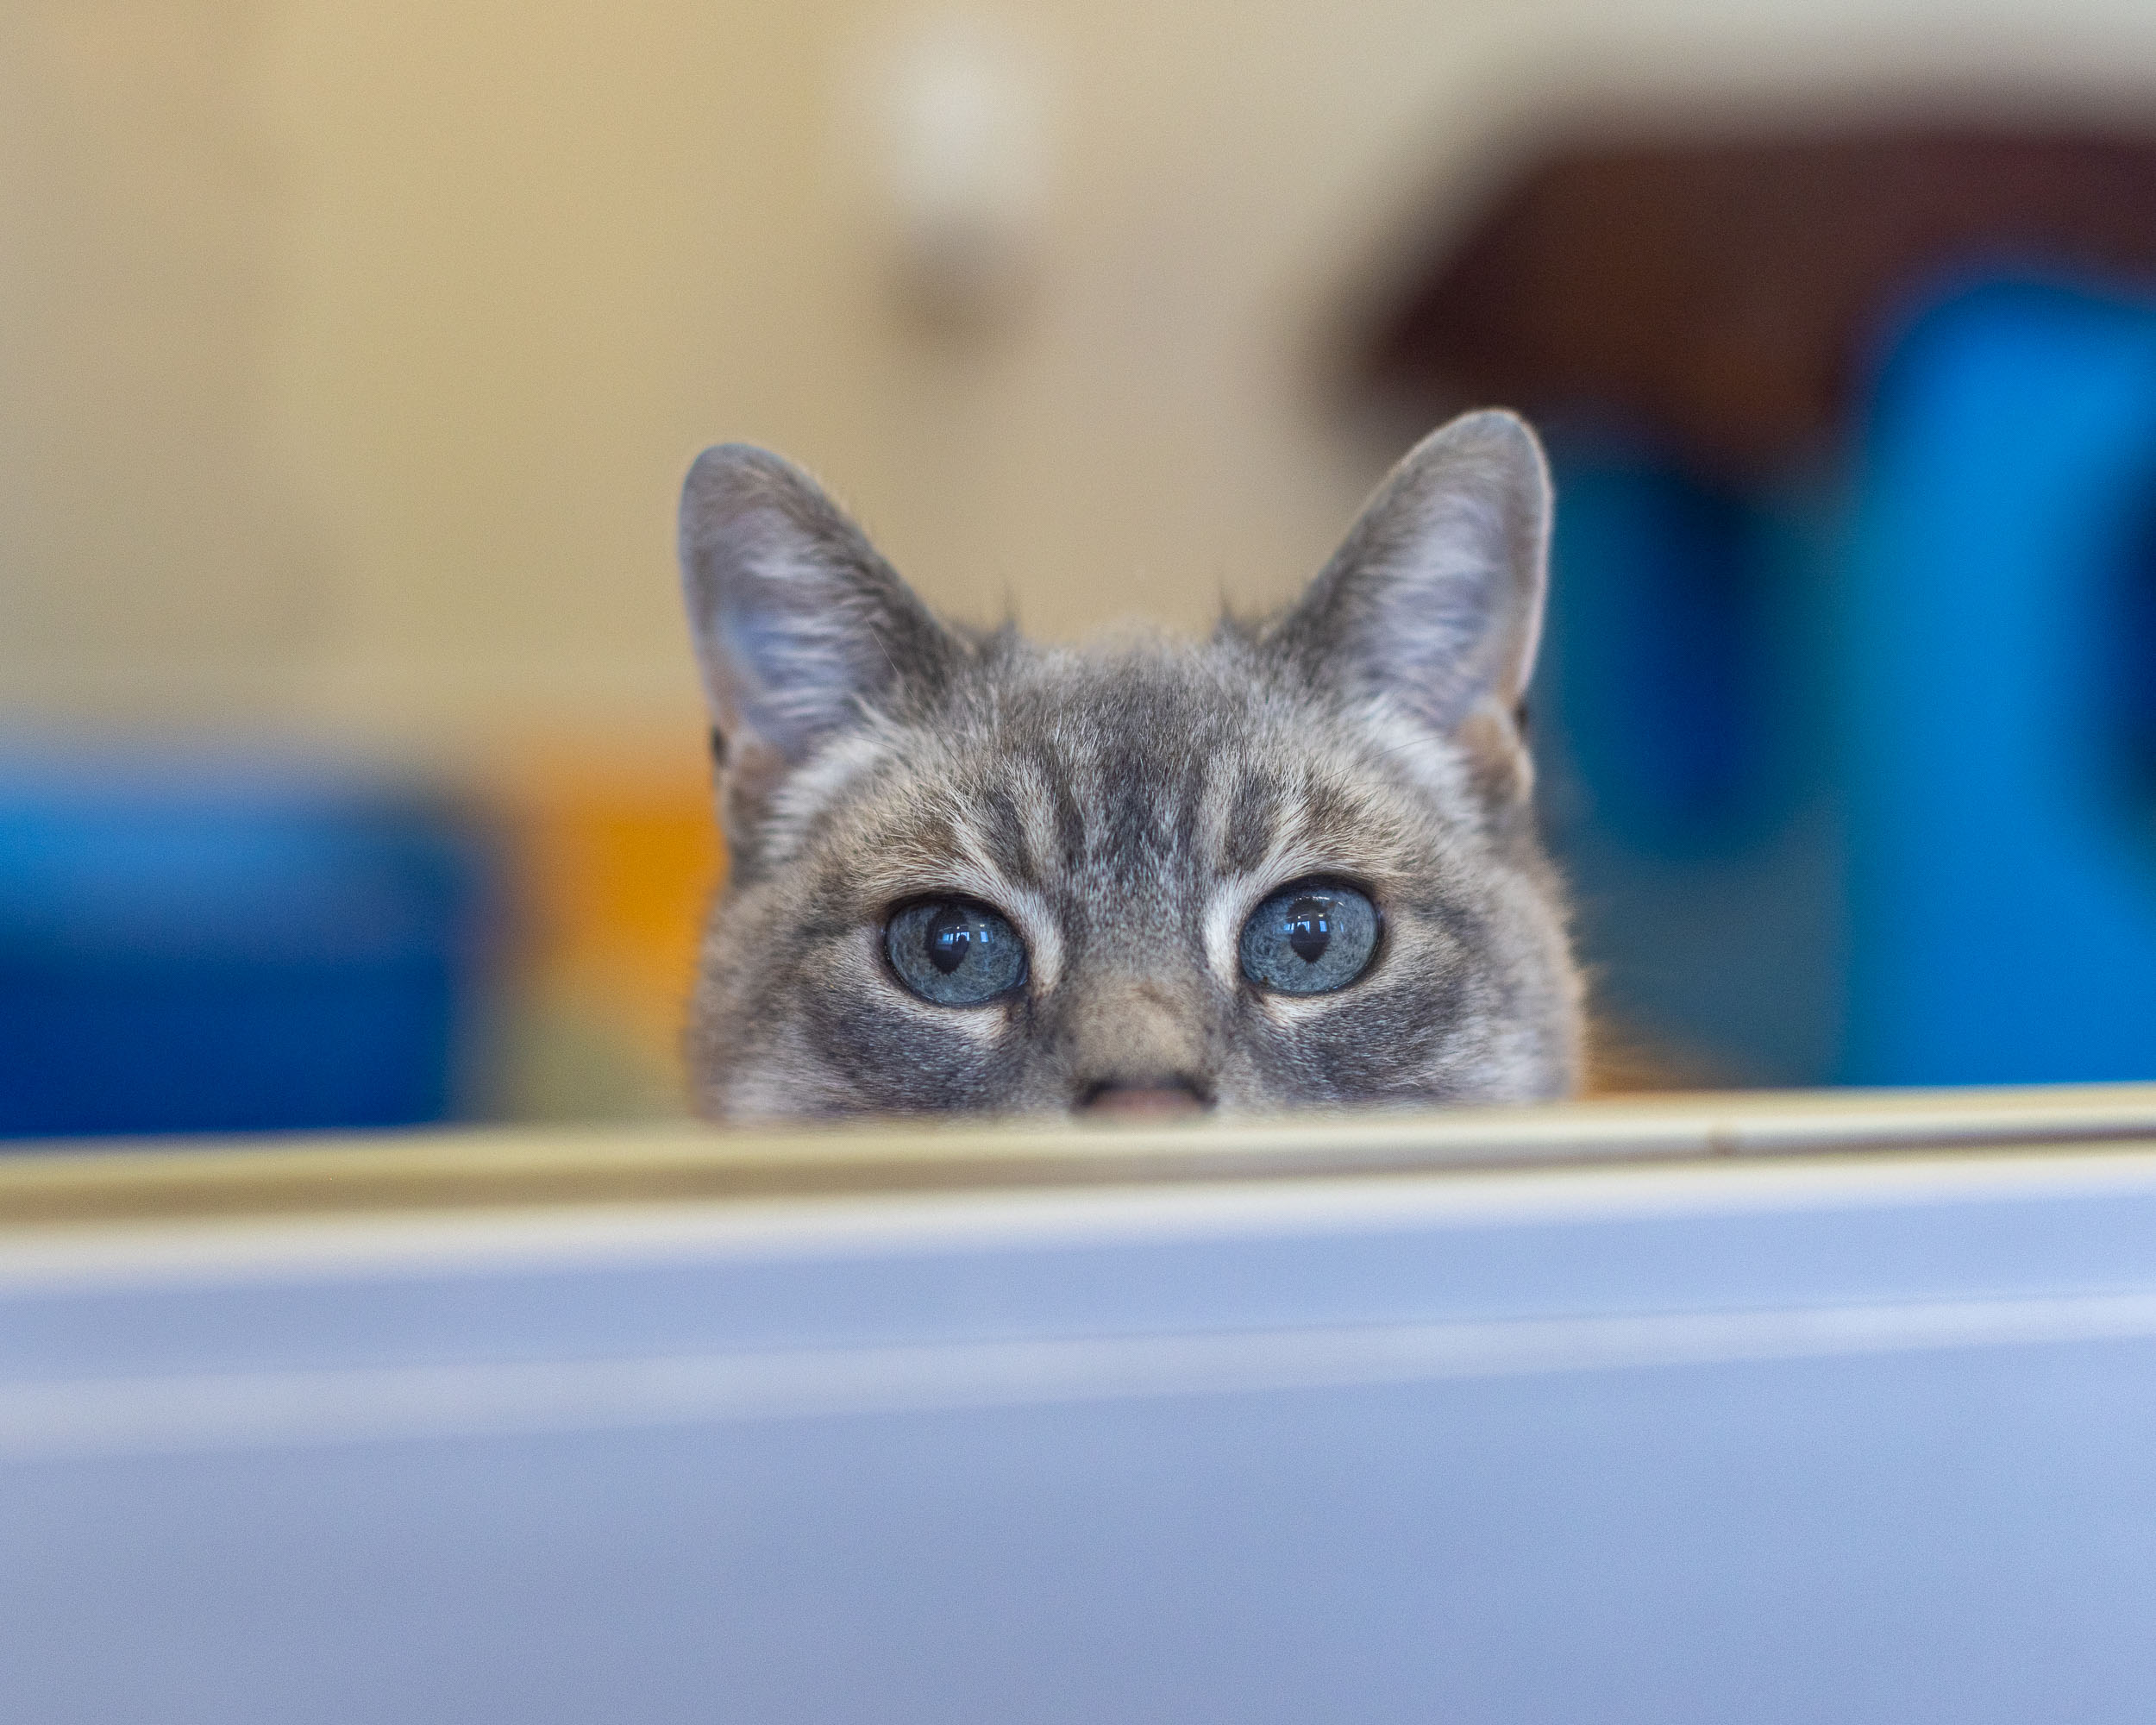 tabby-cat-with-blue-eyes-peeking-through-glass-at-animal-shelter-8558